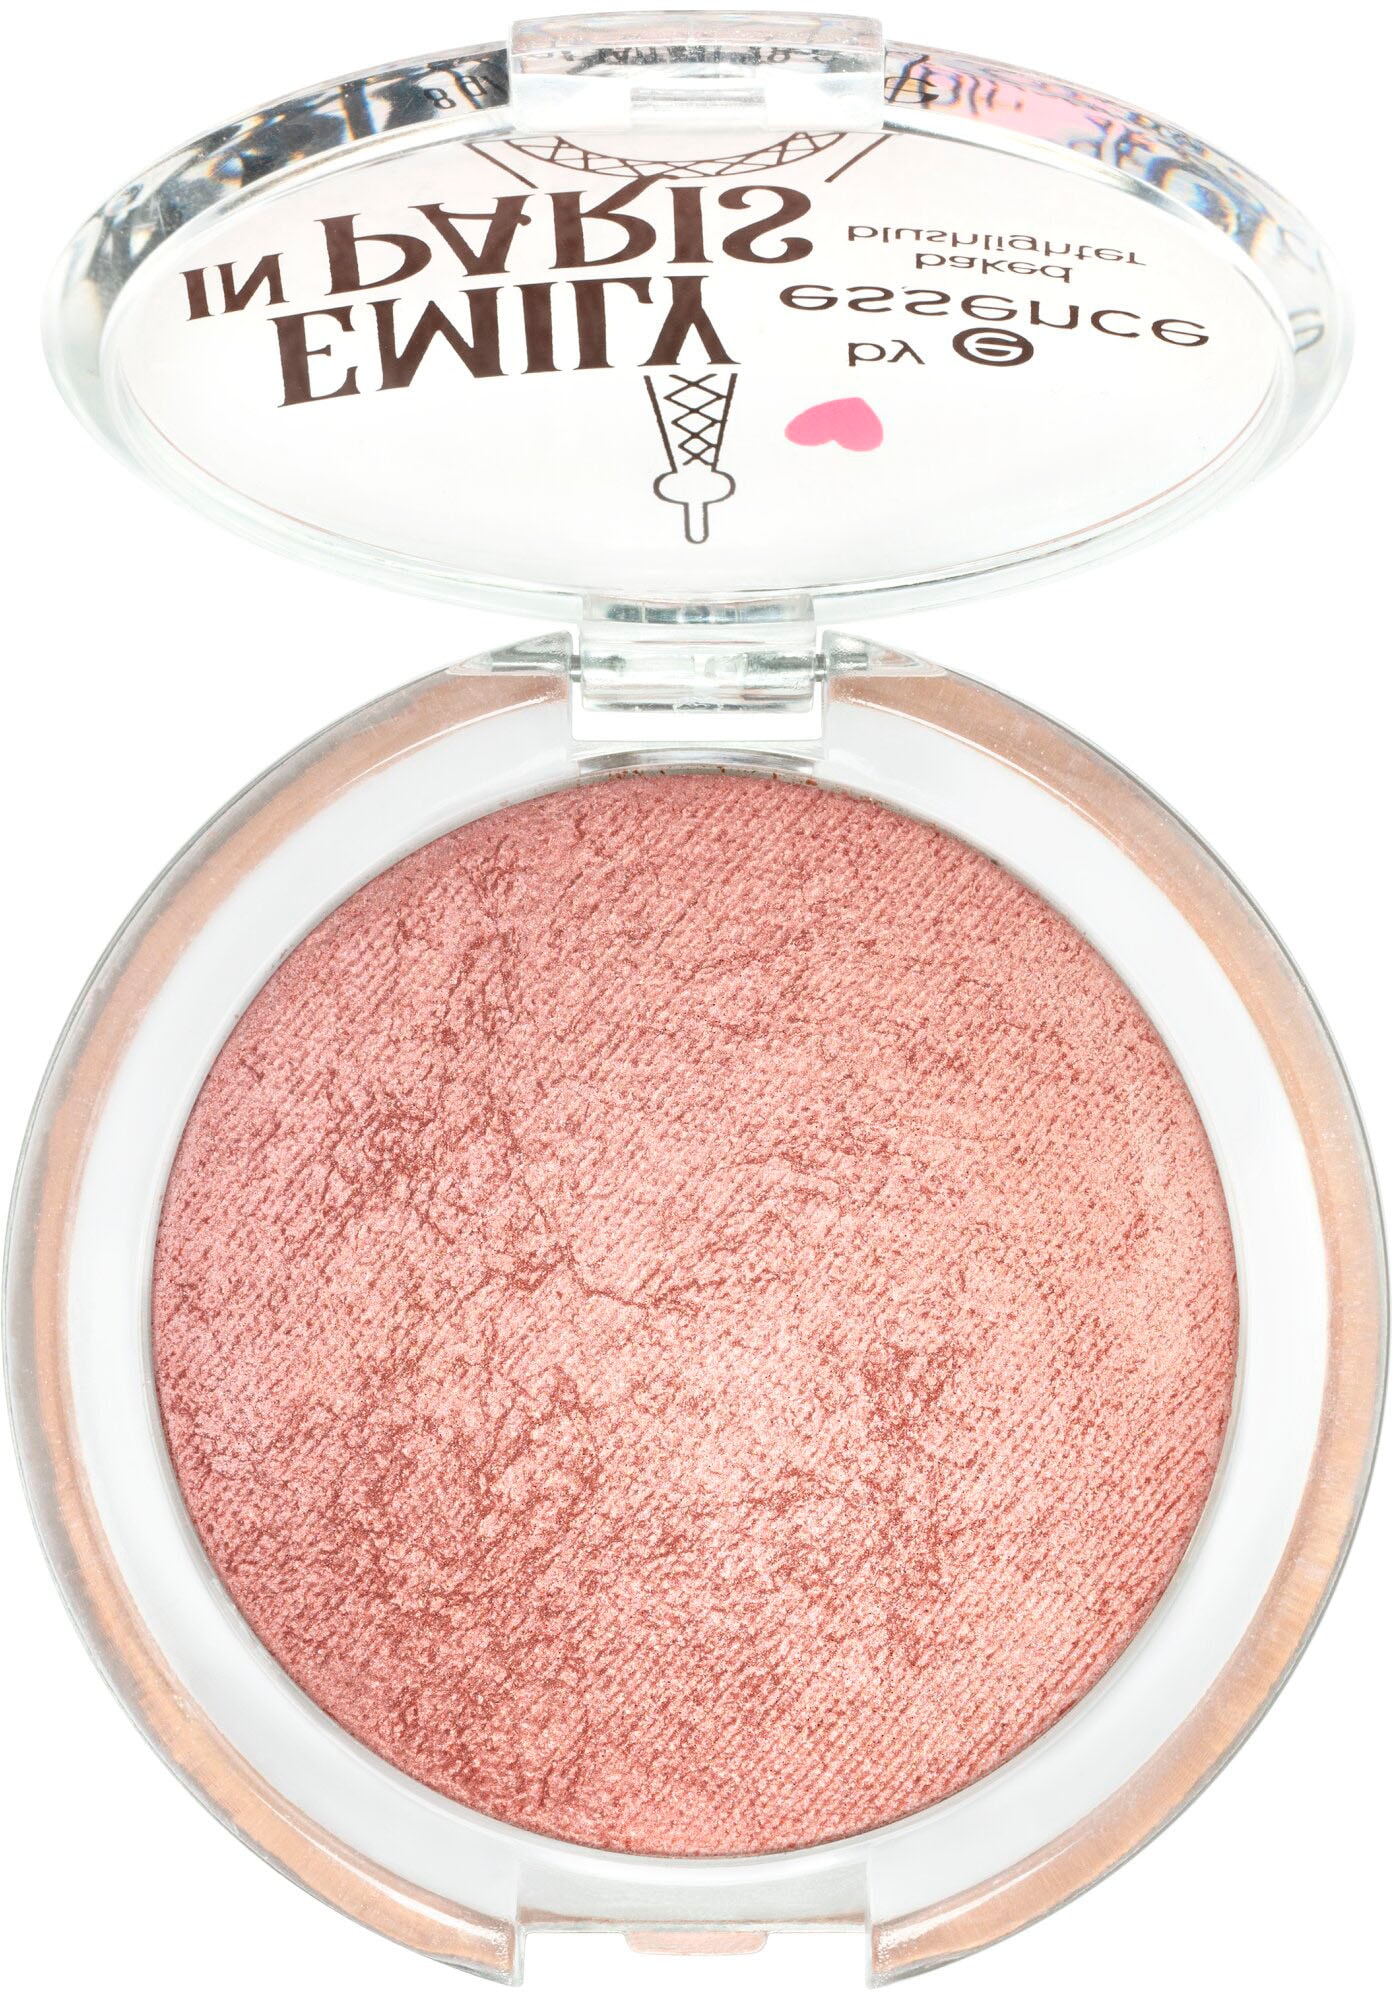 Rouge blushlighter« IN Essence bei online baked essence by PARIS »EMILY